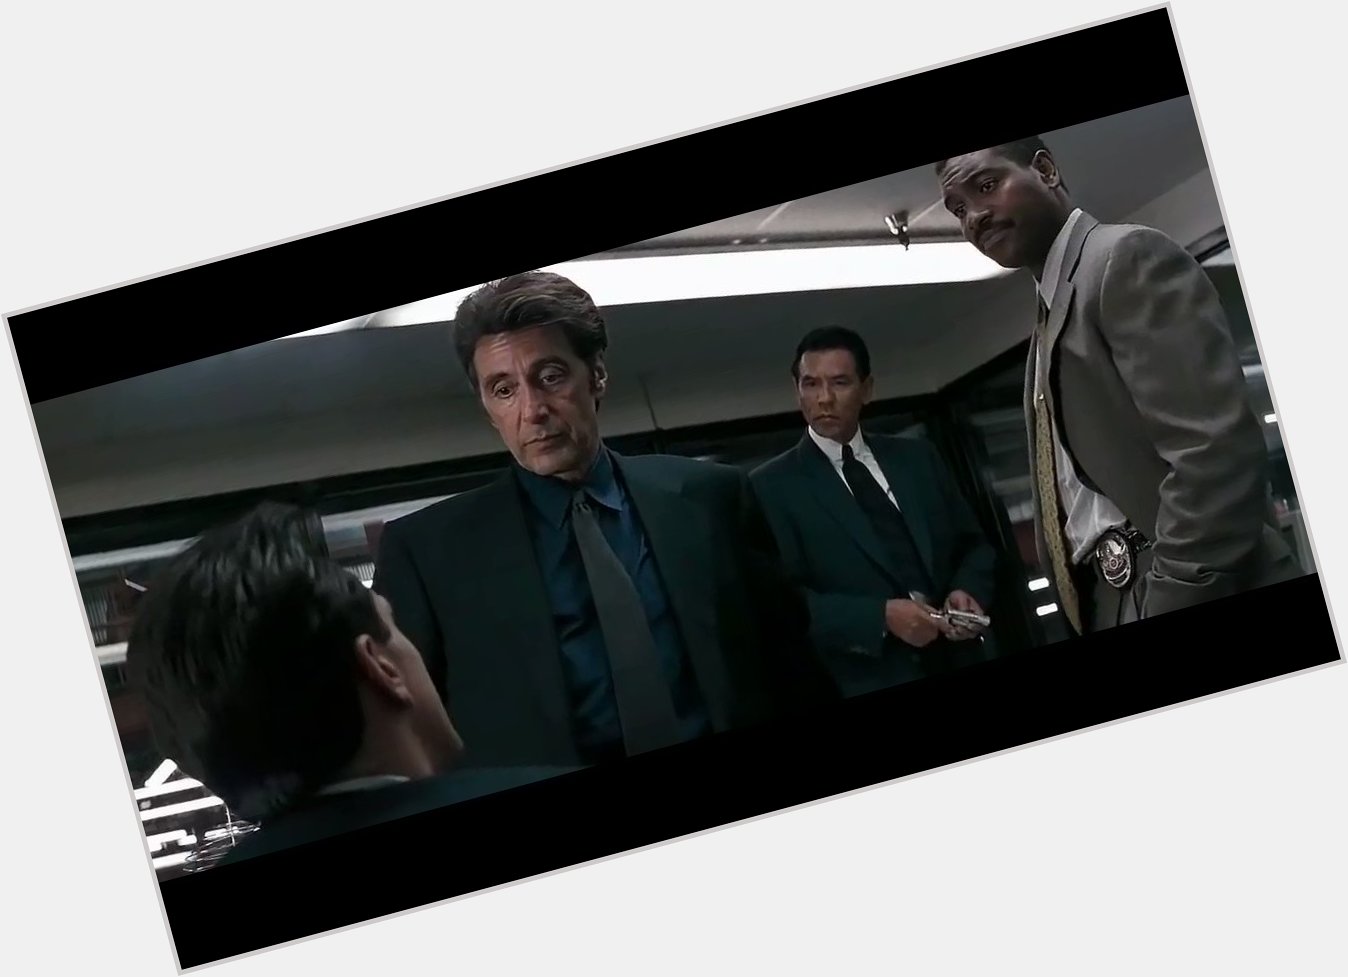 Happy 81st birthday to one and only, Al Pacino 

His performance in Heat
 